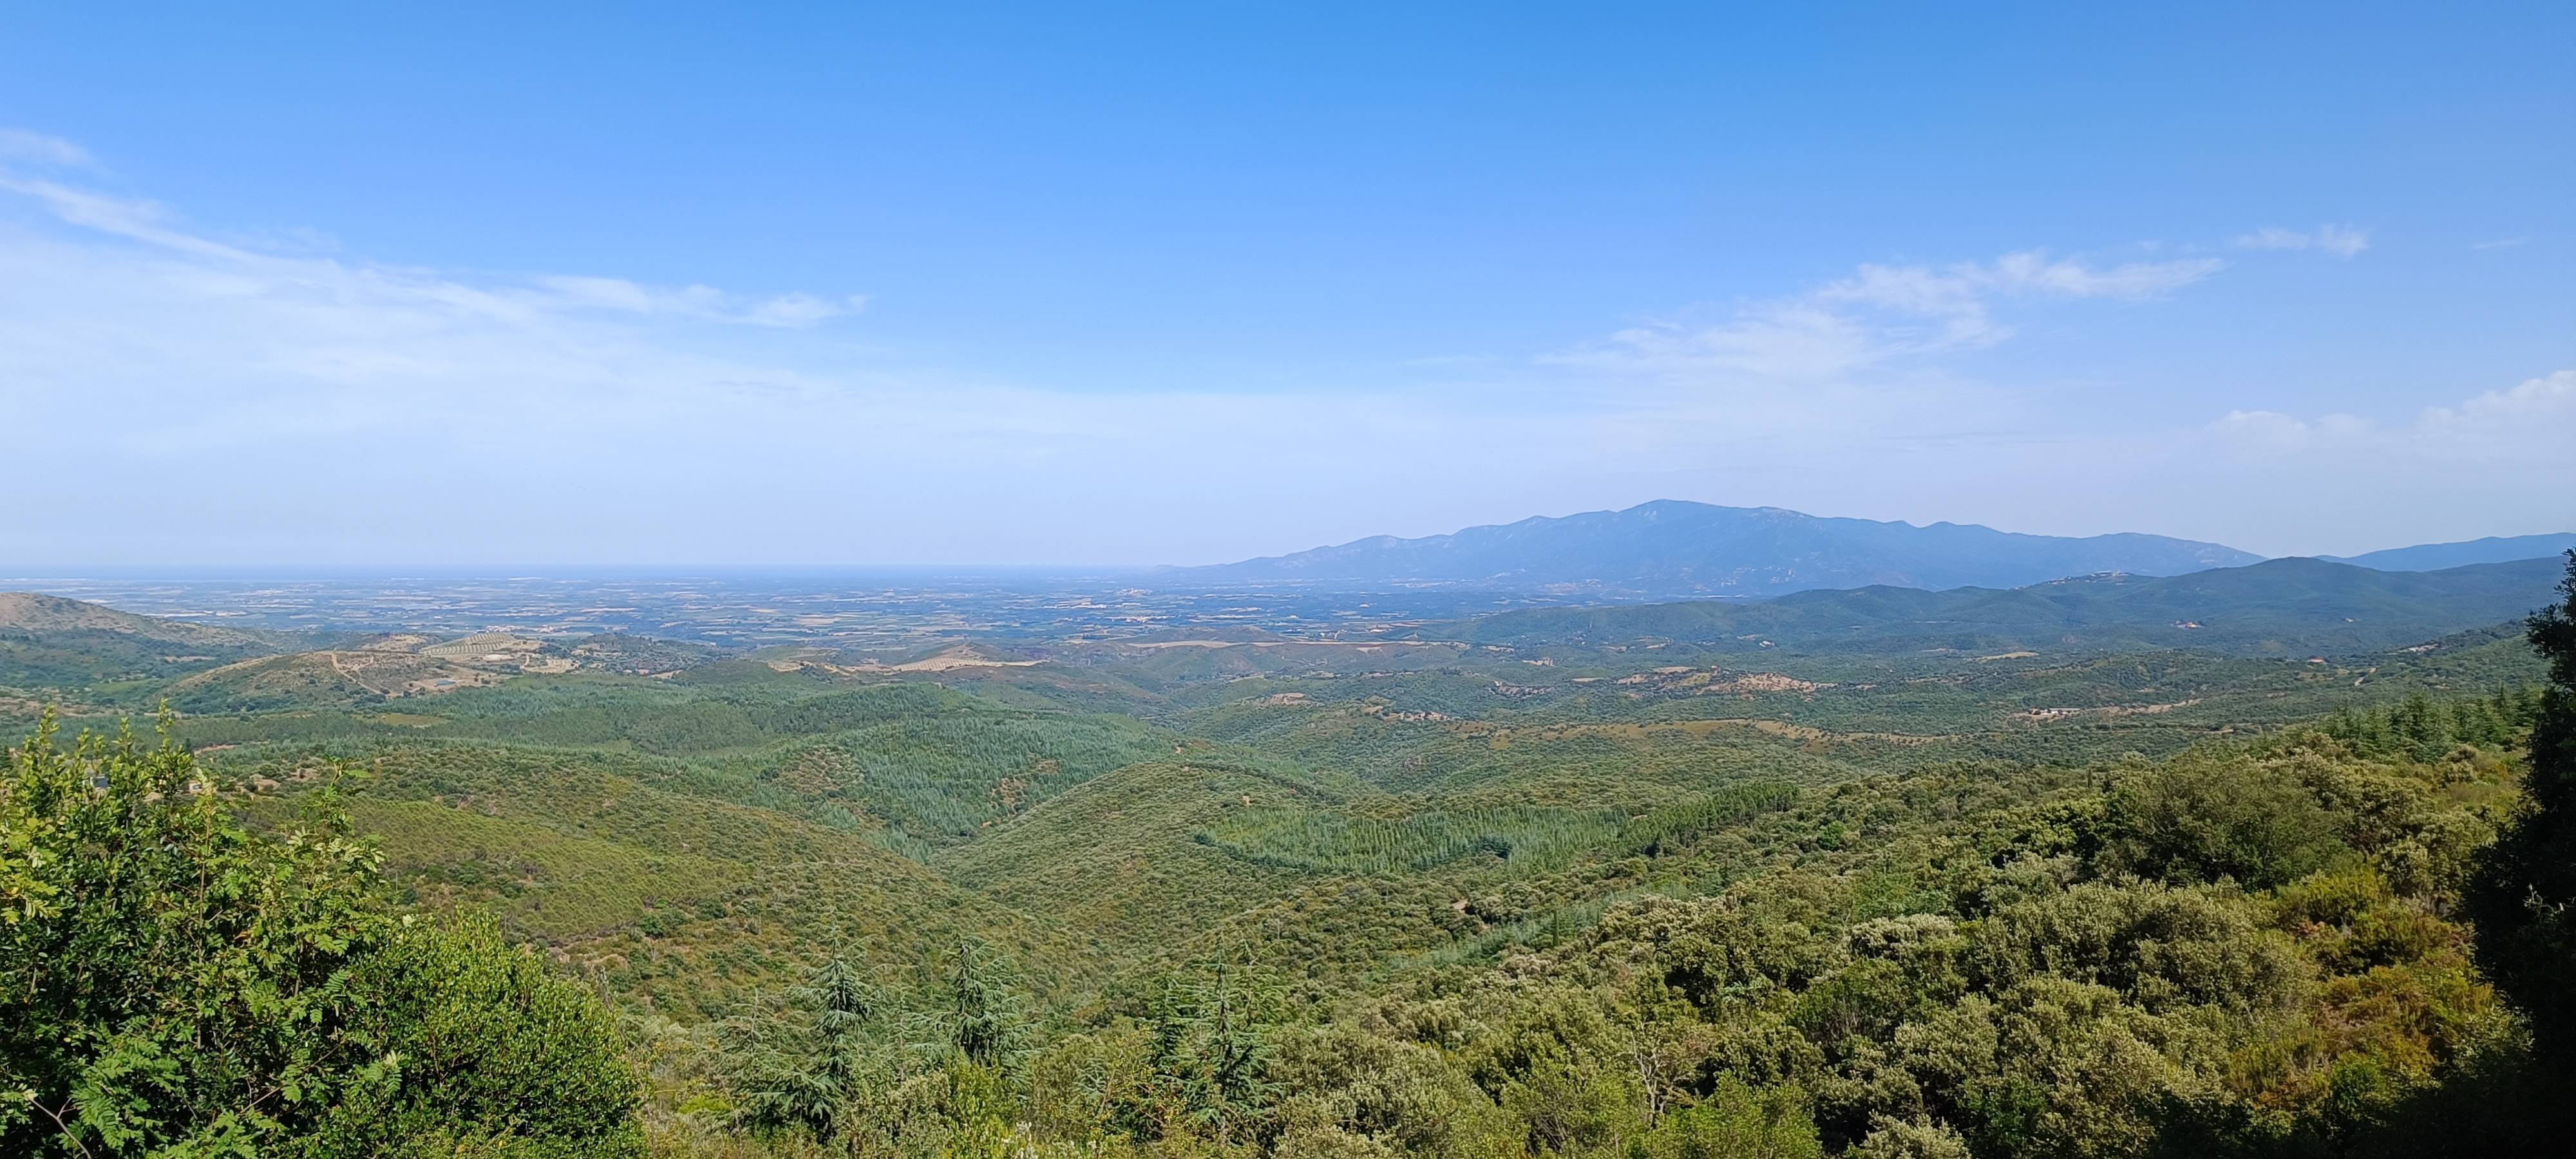 Picture from Area related to Puig Tallat, Castelnou, Col de la Roca shoot by Romano Serra